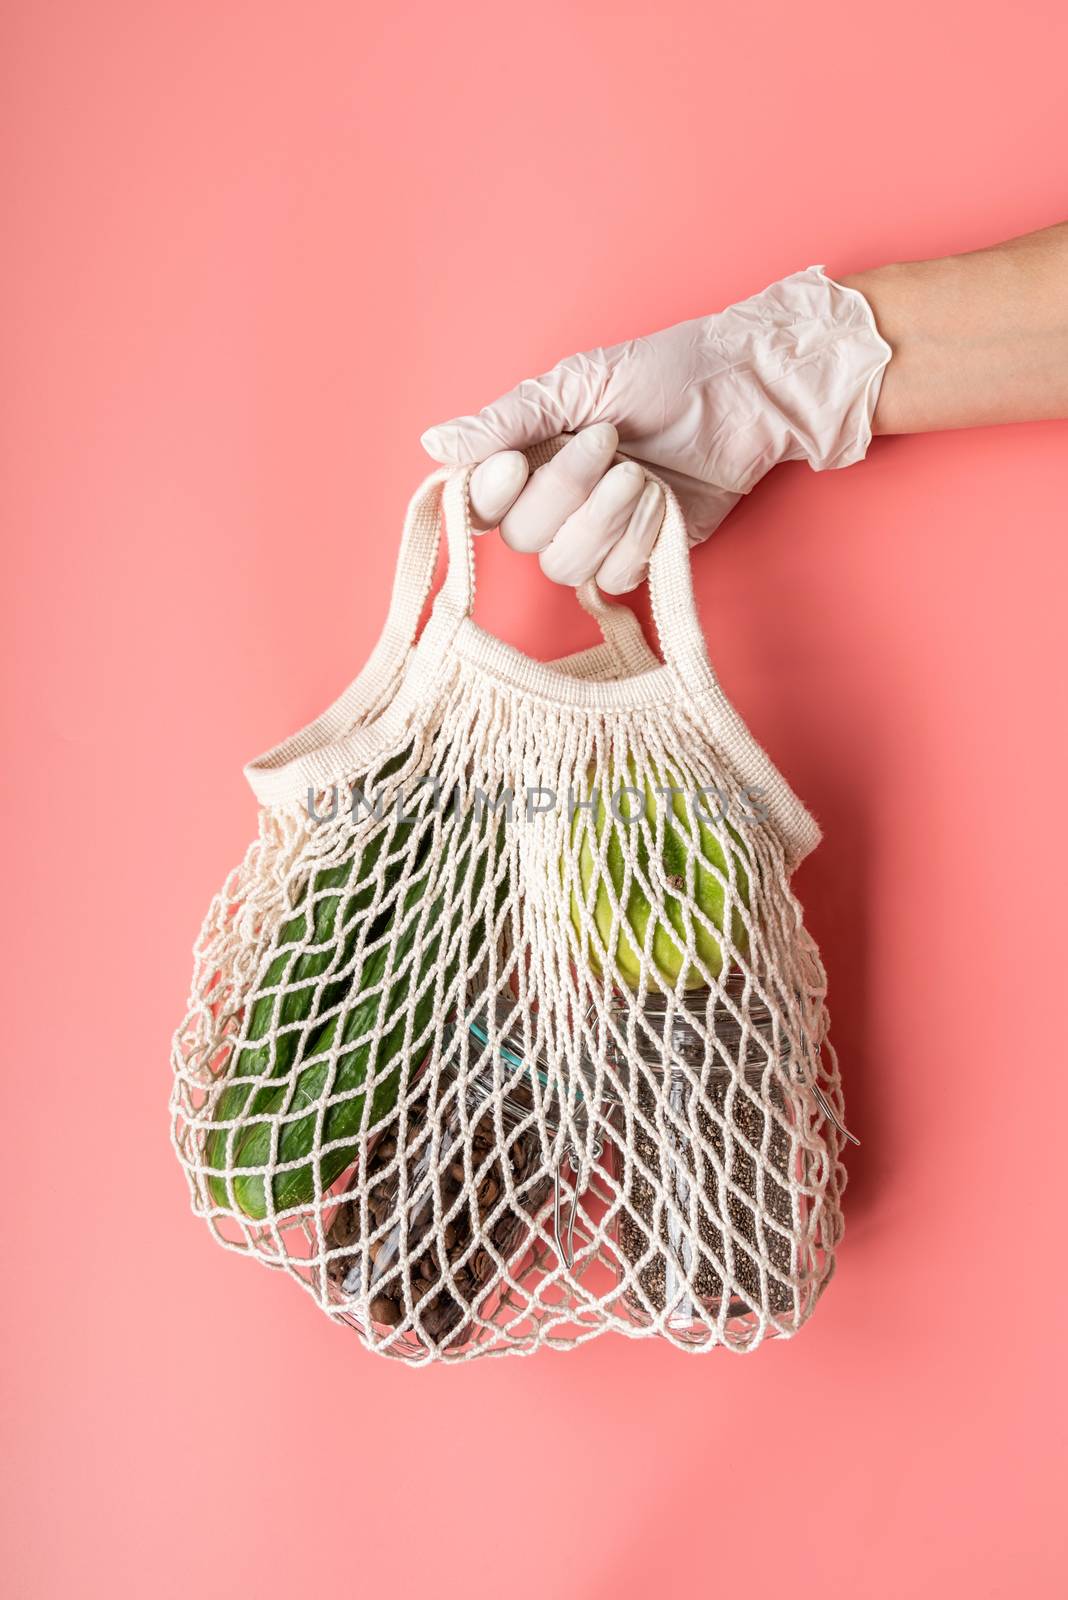 Hand in a glove holding white eco friendly mesh bag with food supplies on pink background by Desperada